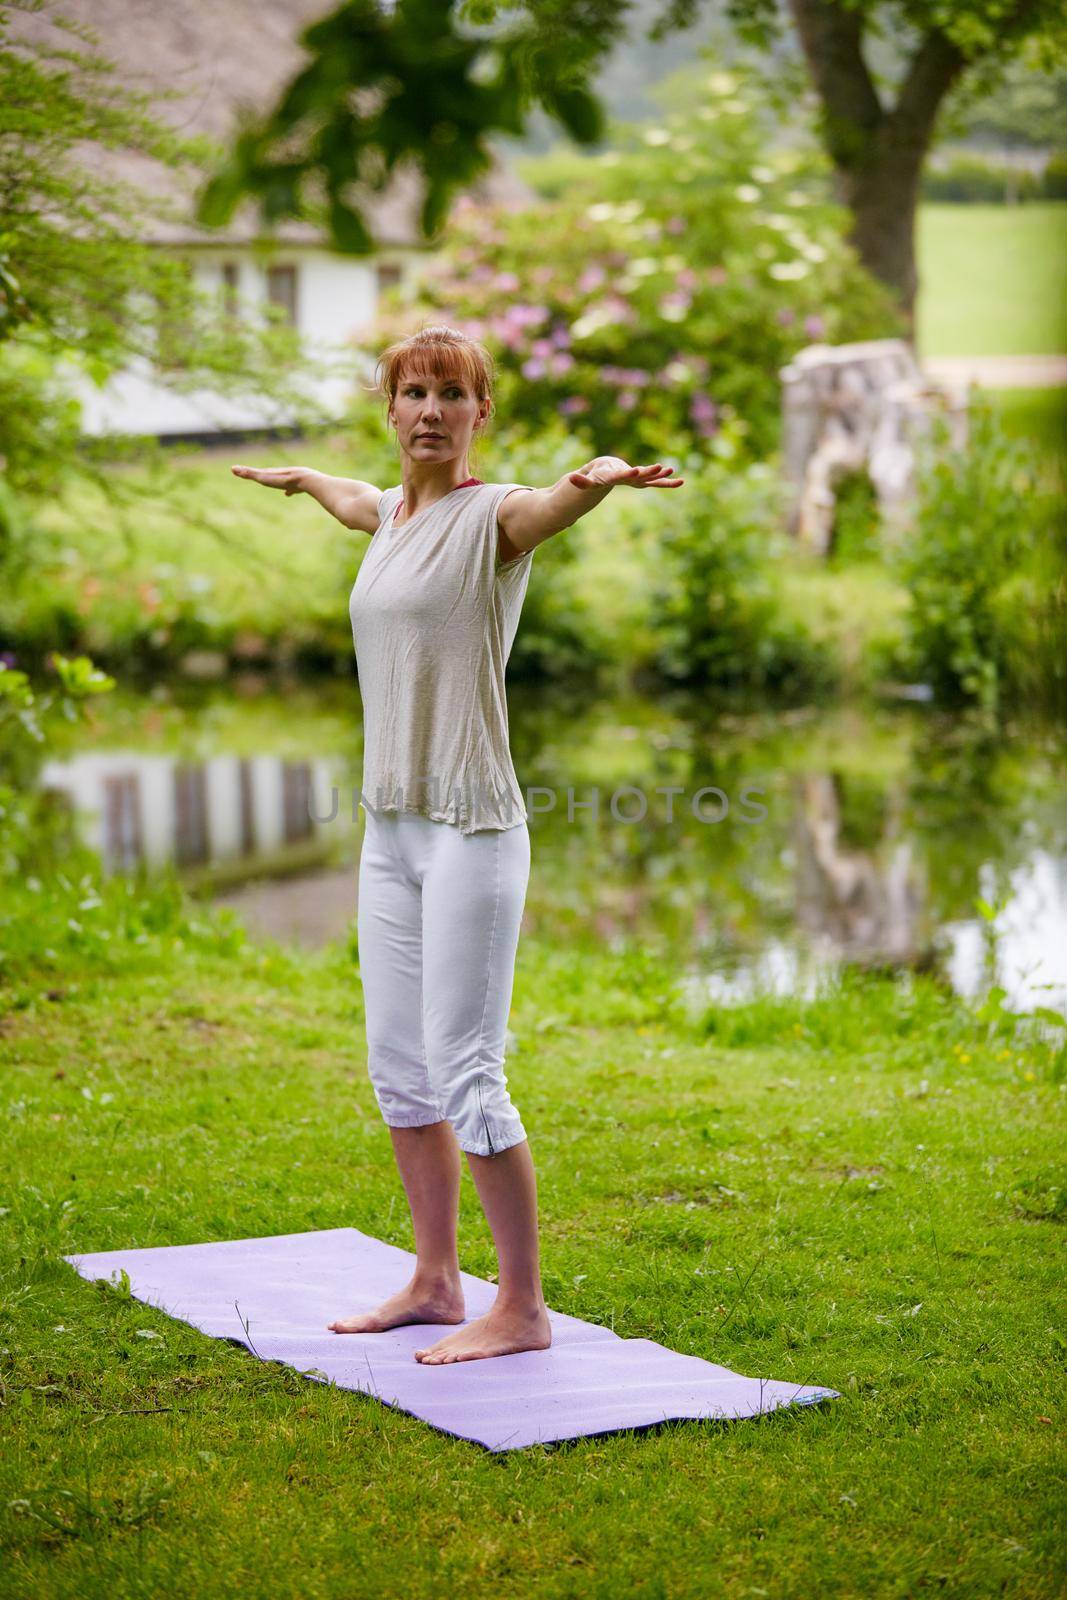 Shot of a woman doing yoga in the park.